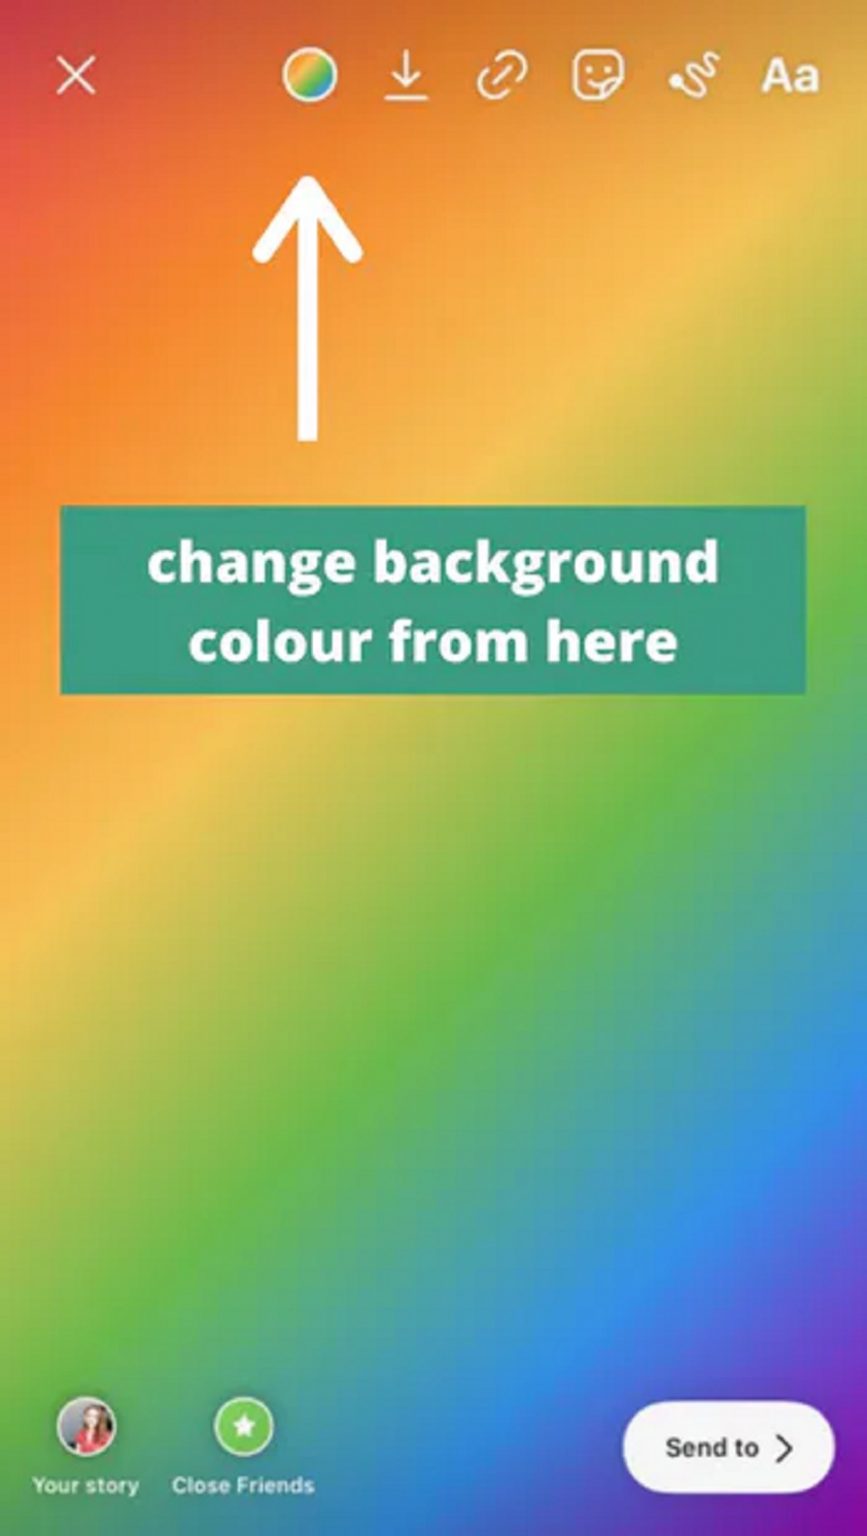 How To Change The Background Color On Instagram Story 2021 HowToDownload